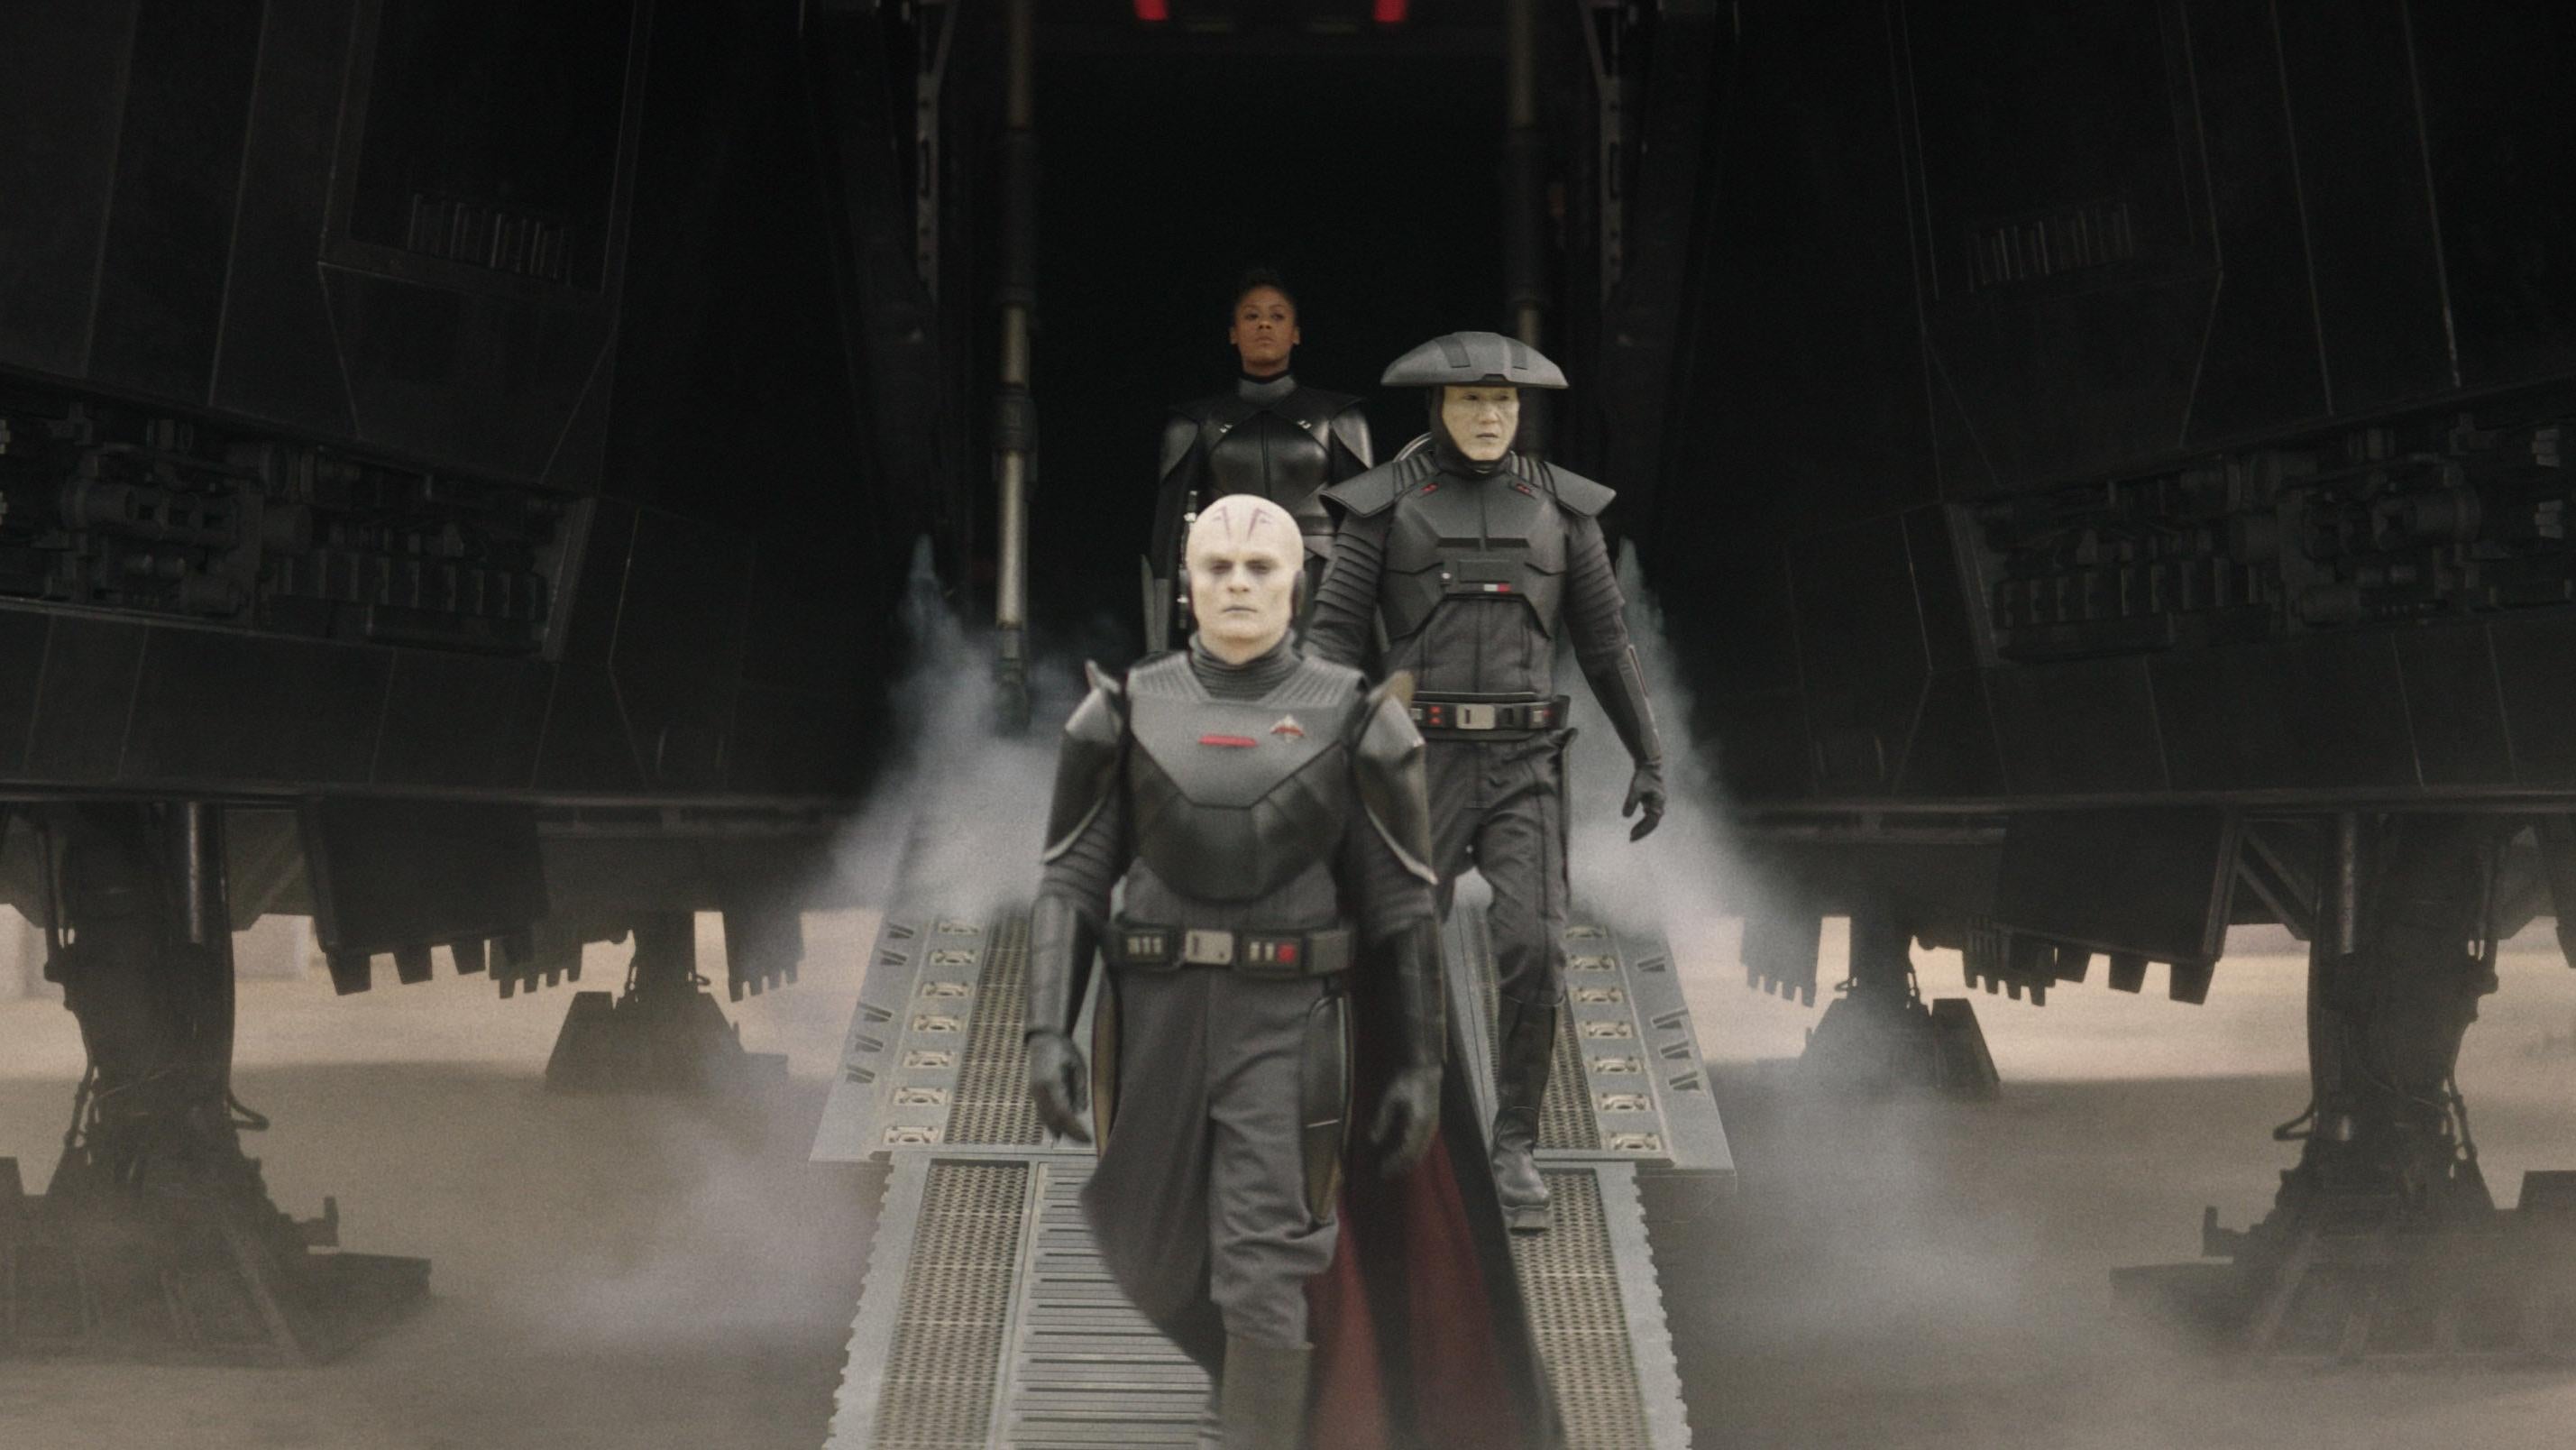 The Inquisitor theme was in place from the beginning. (Image: Lucasfilm)